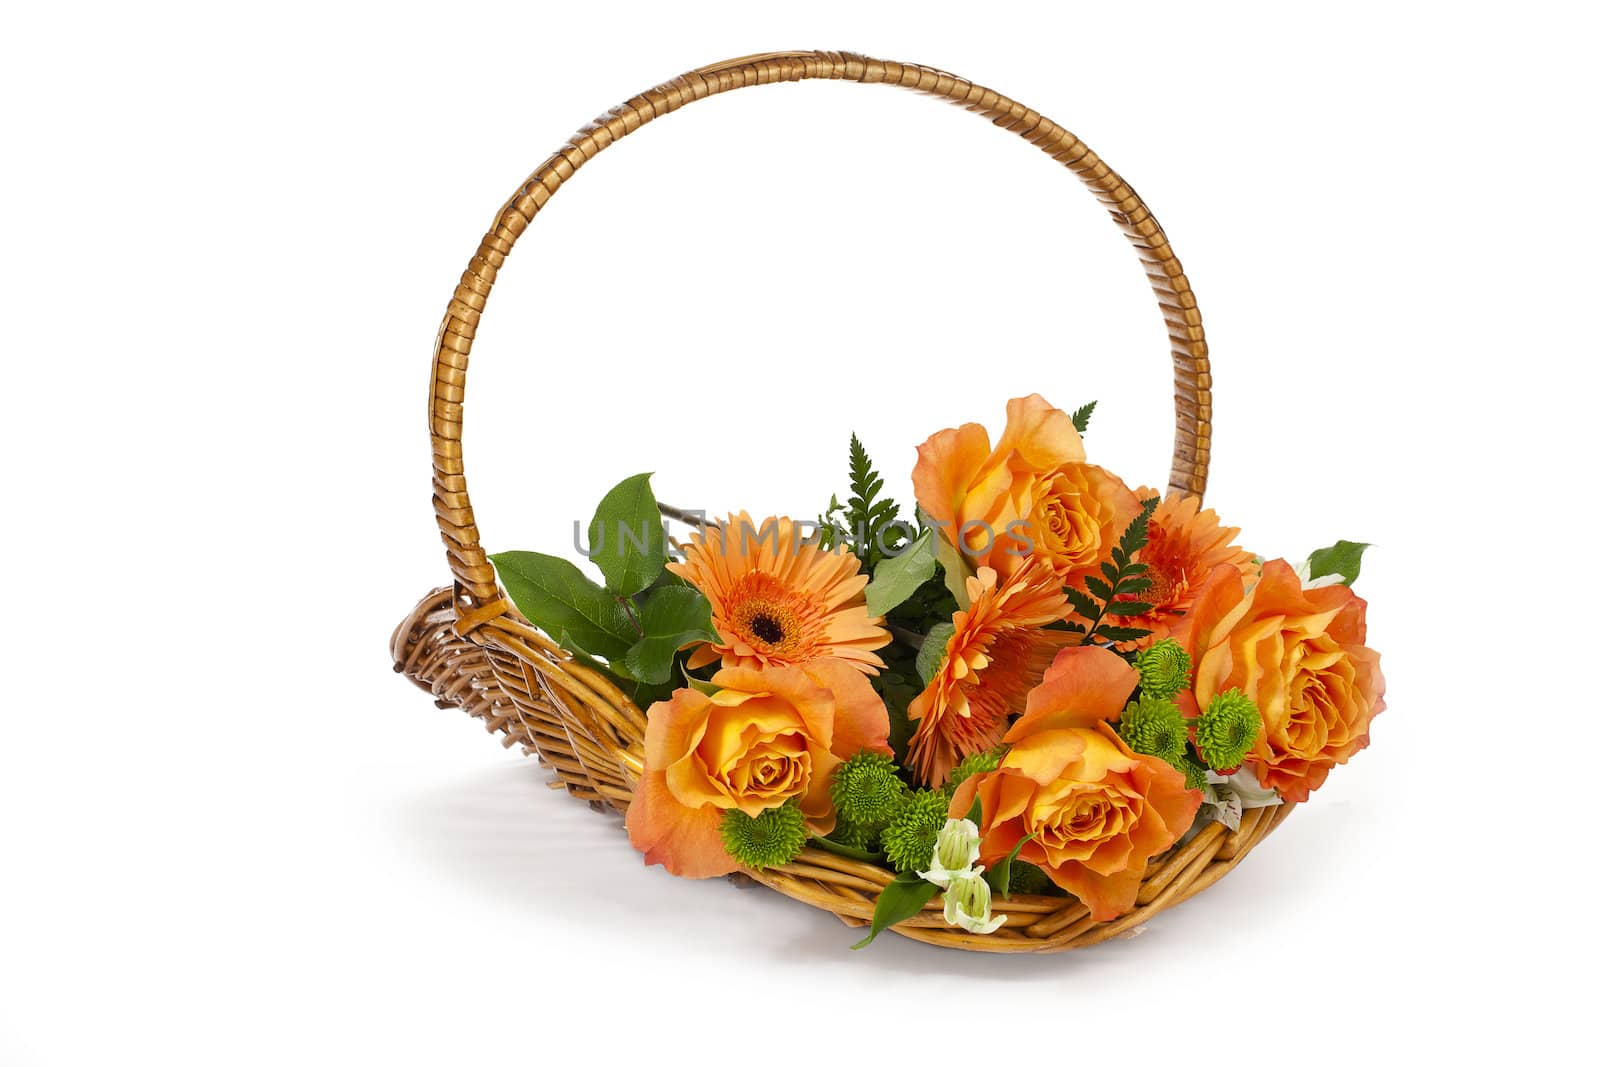 Close-up shot of a wicker basket with orange flowers on white surface.